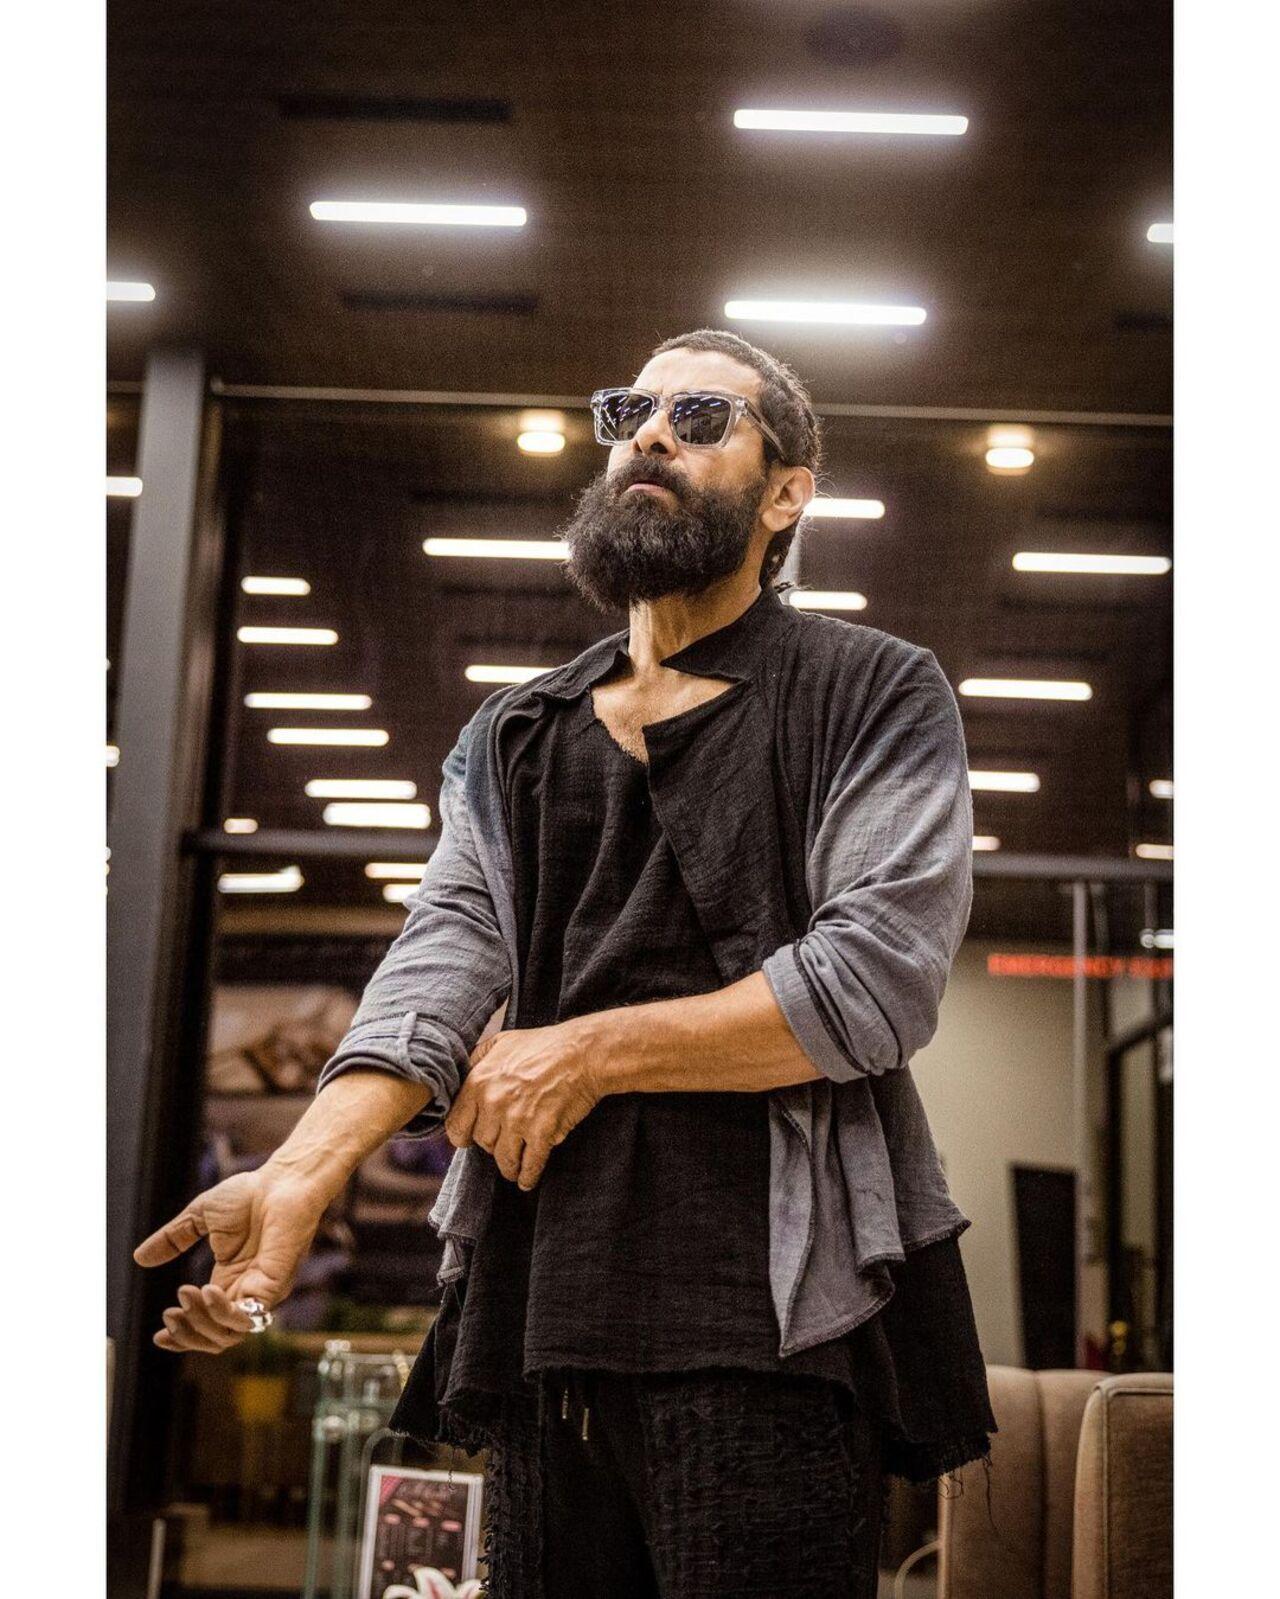 Vikram knows how to rock in layers with just shades of black